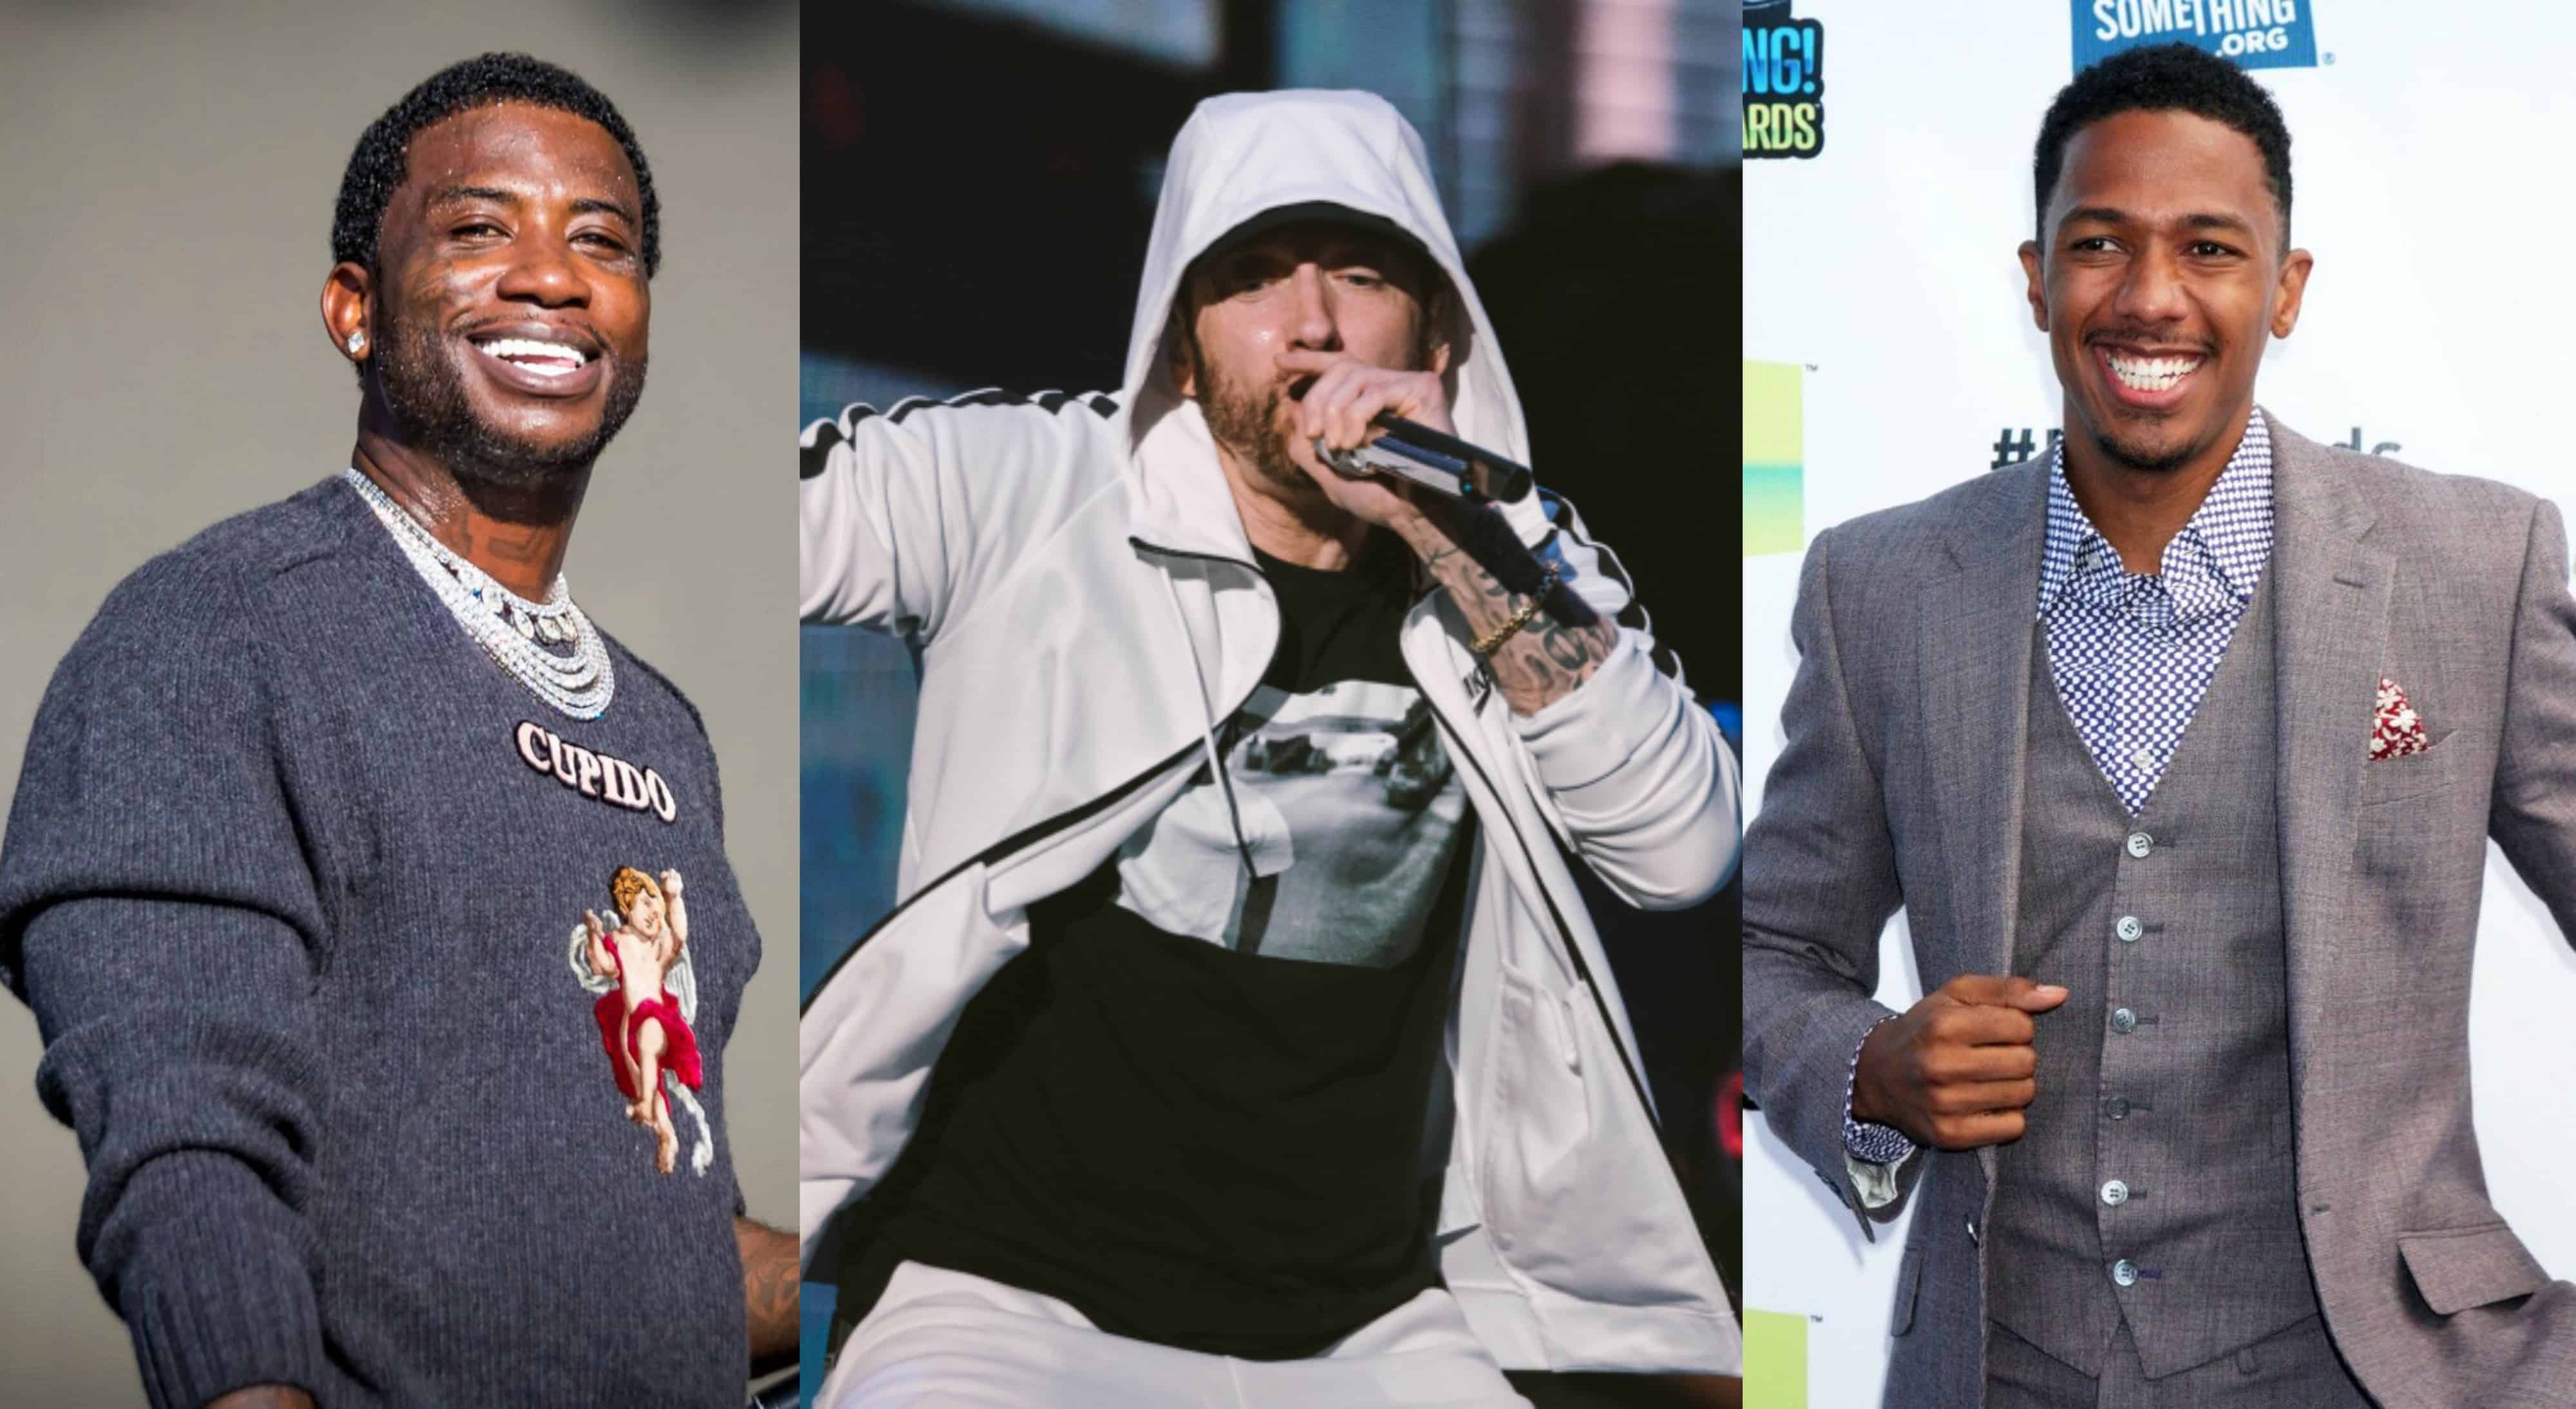 Watch Nick Cannon Says Gucci Mane Offered To 'Handle Things' During his Eminem Beef